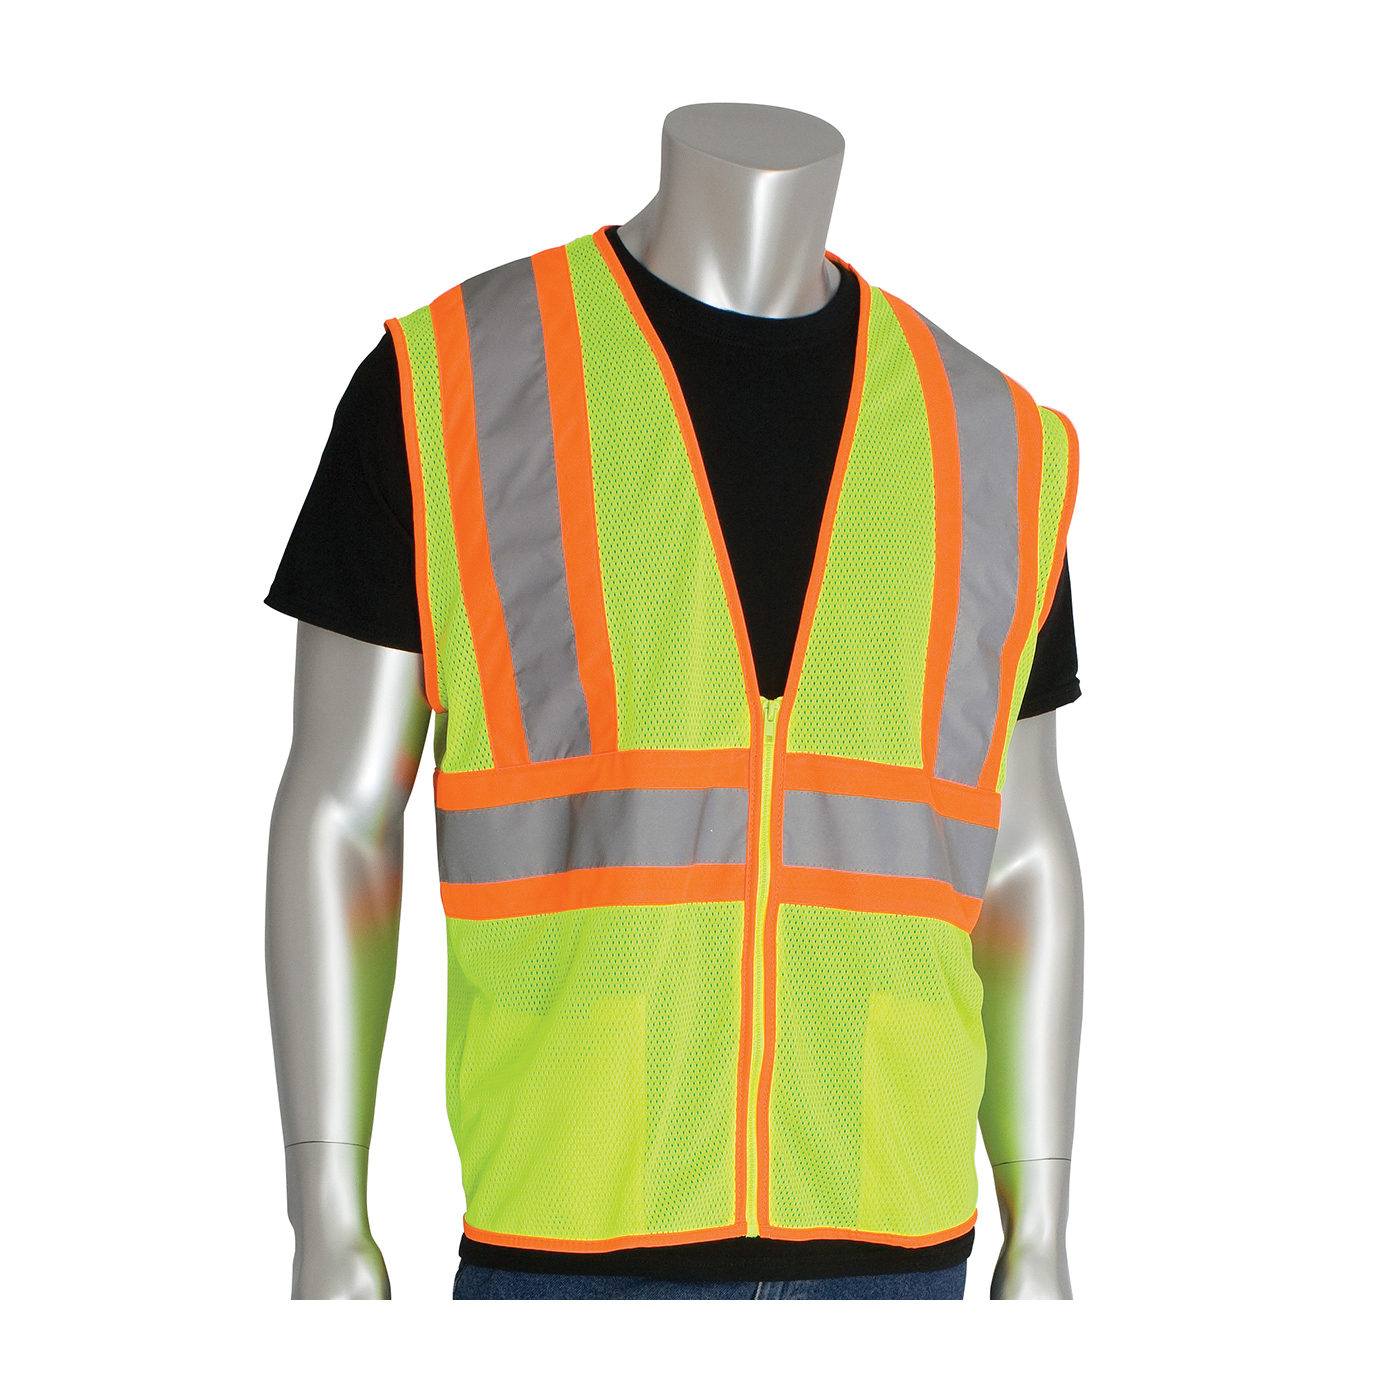 PIP® 302-MVLY-S 2-Tone Safety Vest, S, Hi-Viz Lime Yellow, Polyester Mesh, Zipper Closure, 2 Pockets, ANSI Class: Class 2, Specifications Met: ANSI 107 Type R